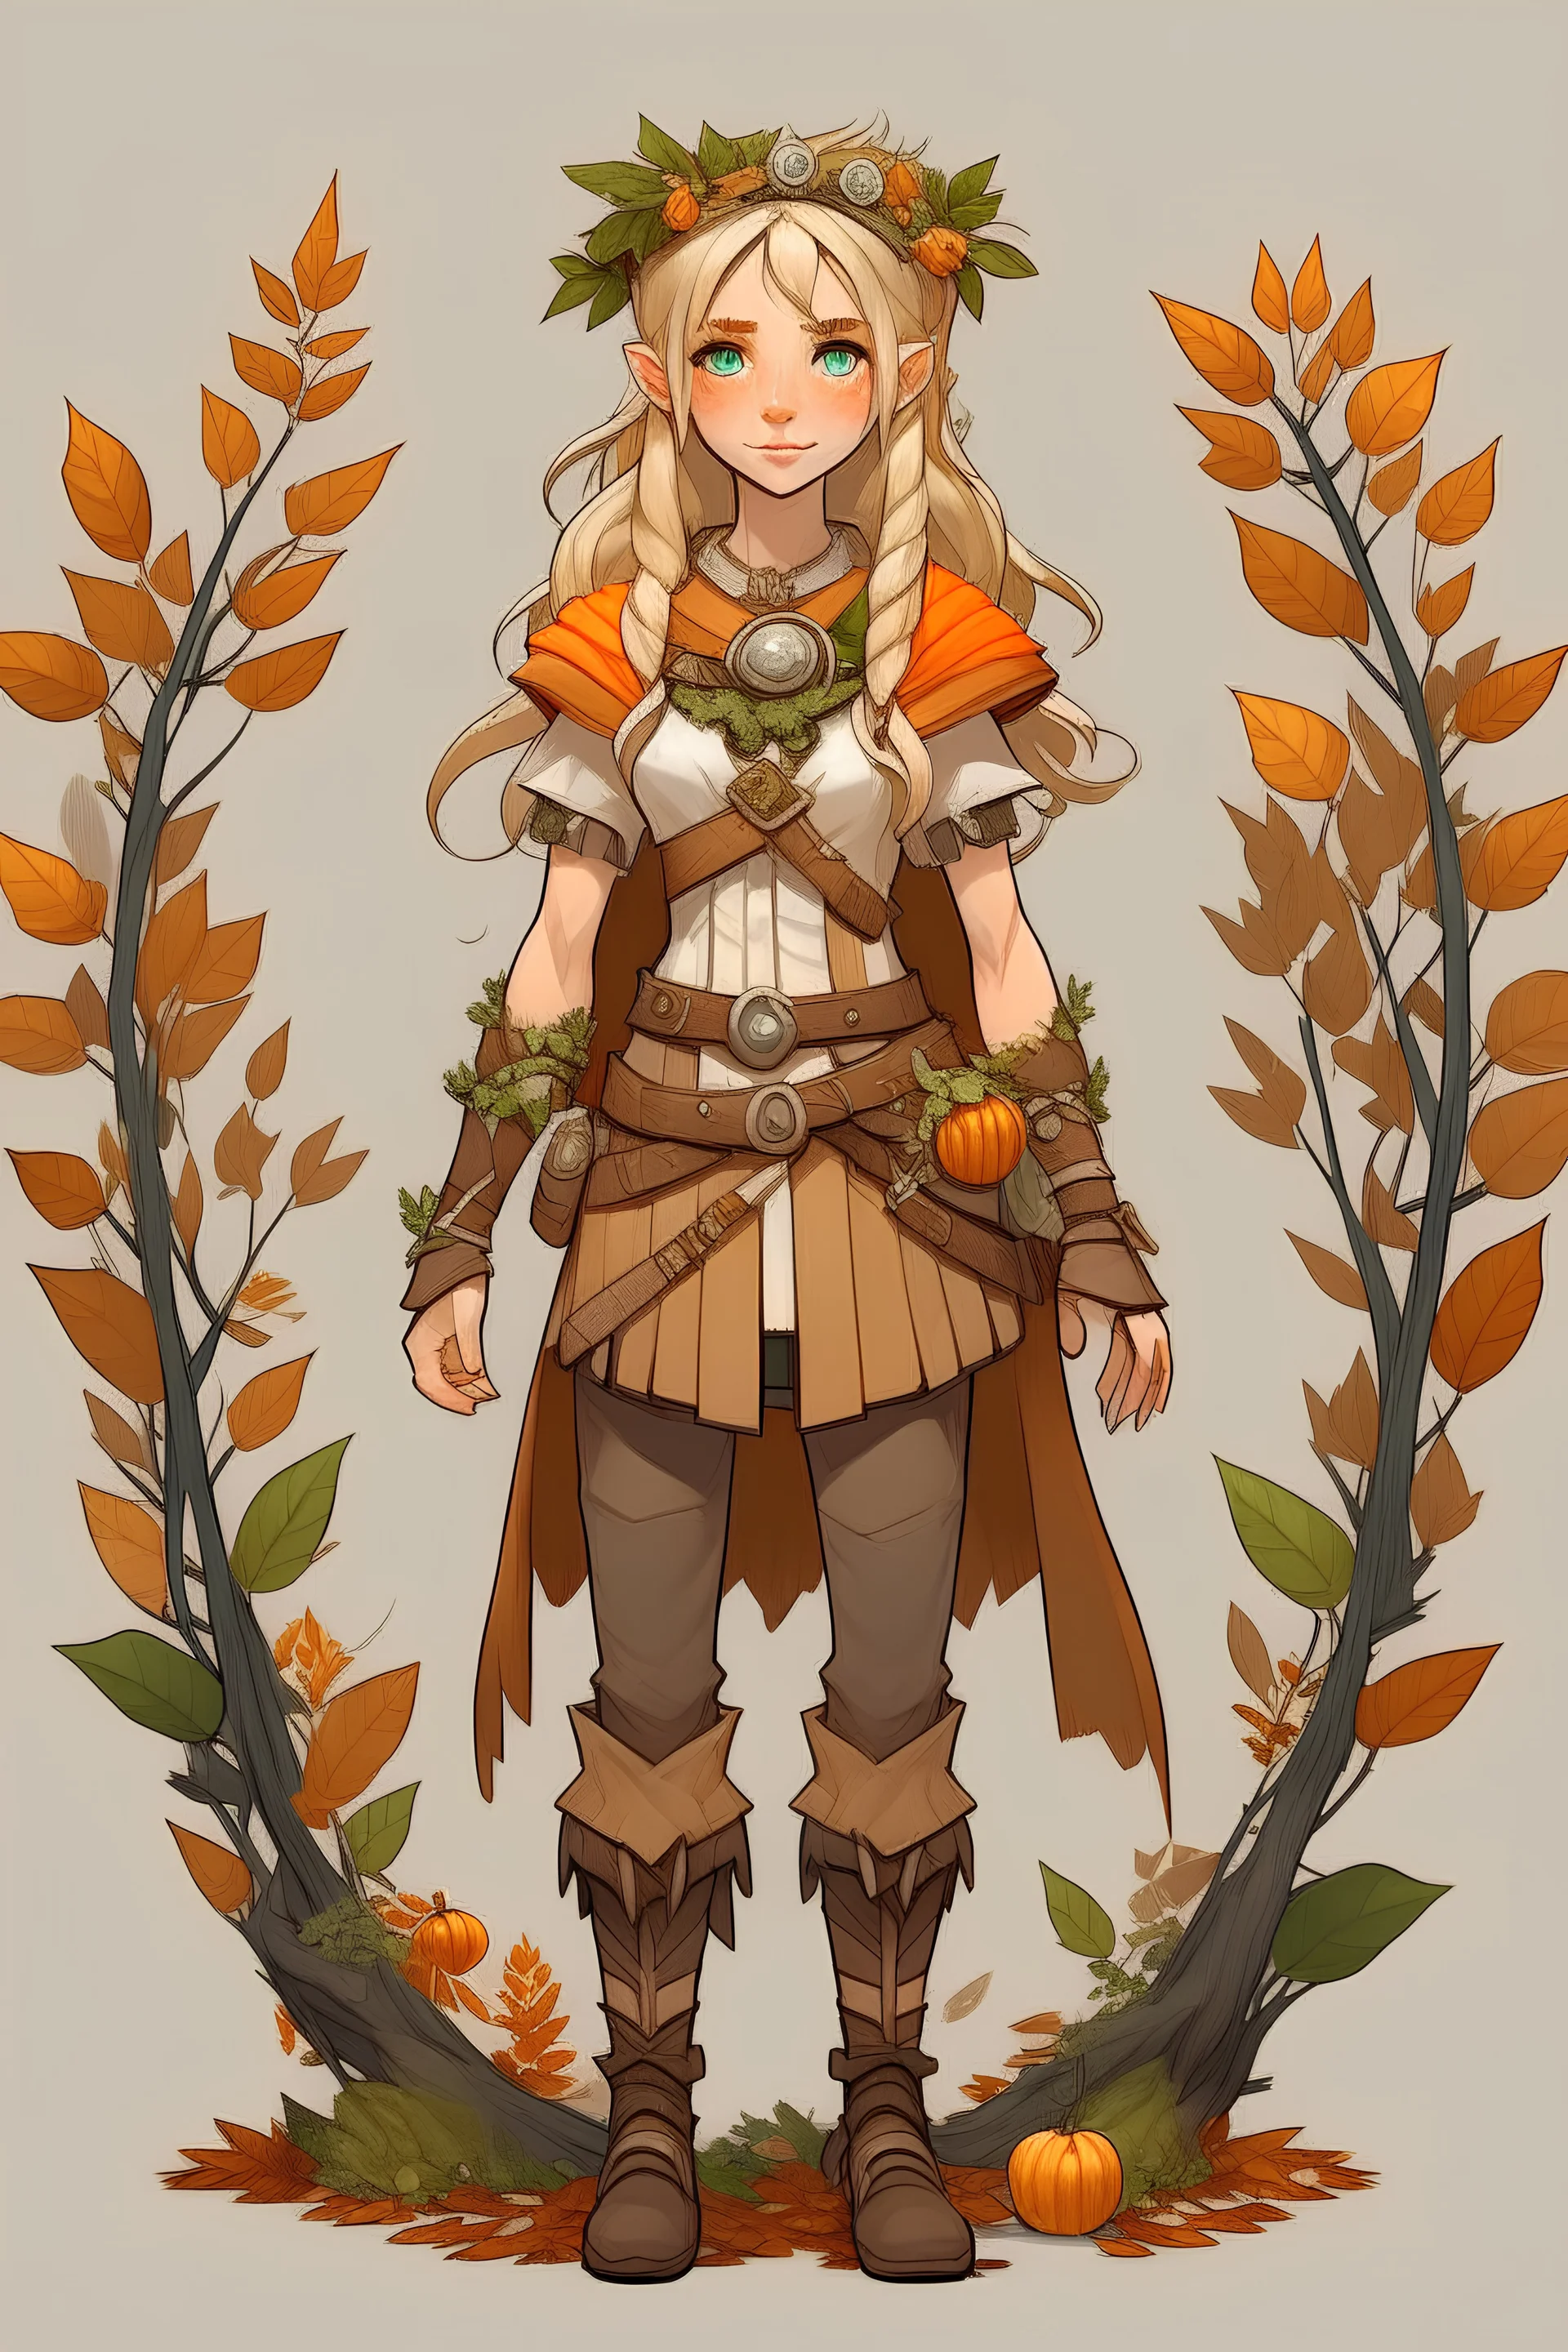 fullbody a girl druid wood elf with blond hair with some braids and loose hair and orange eyes. wearing cream clothes and light armour. a circlet of leaves and pinecones. and a pinecone staff